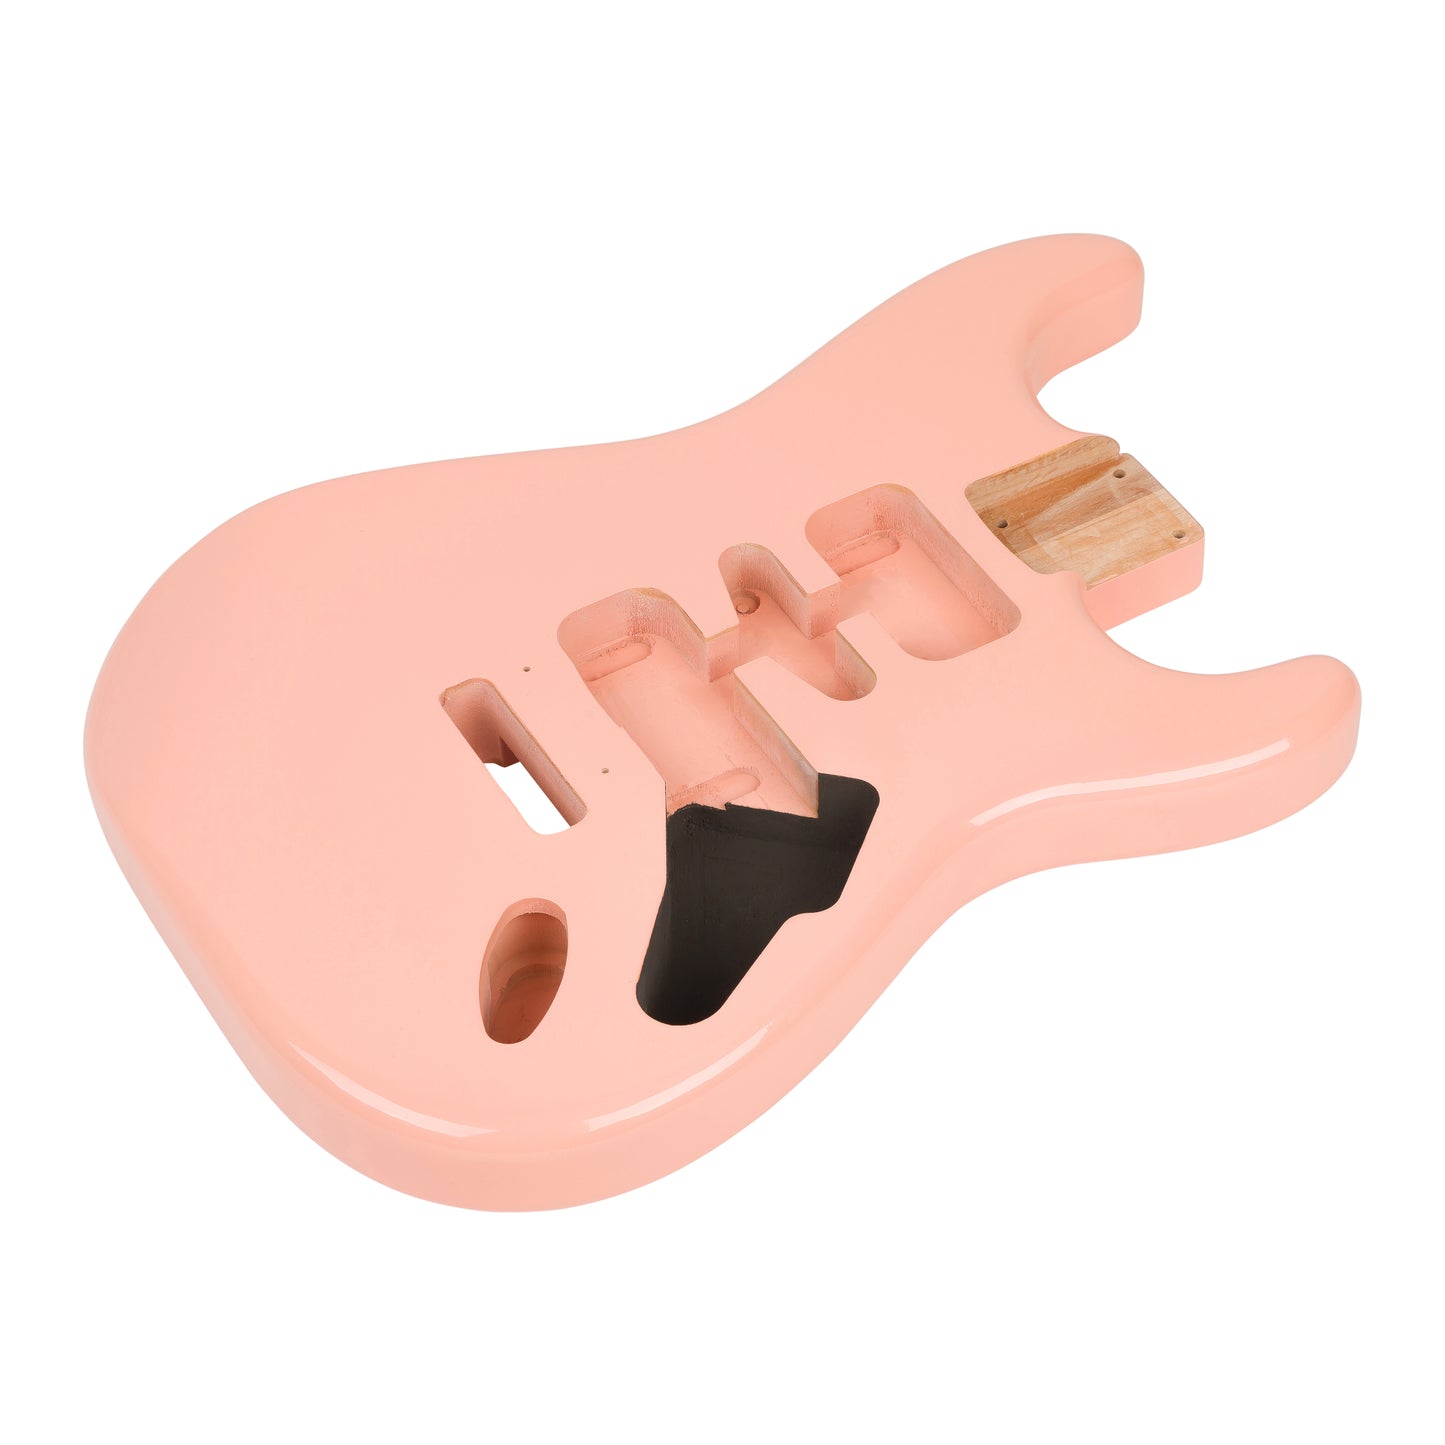 AE Guitars® S-Style Alder Replacement Guitar Body Shell Pink Nitro